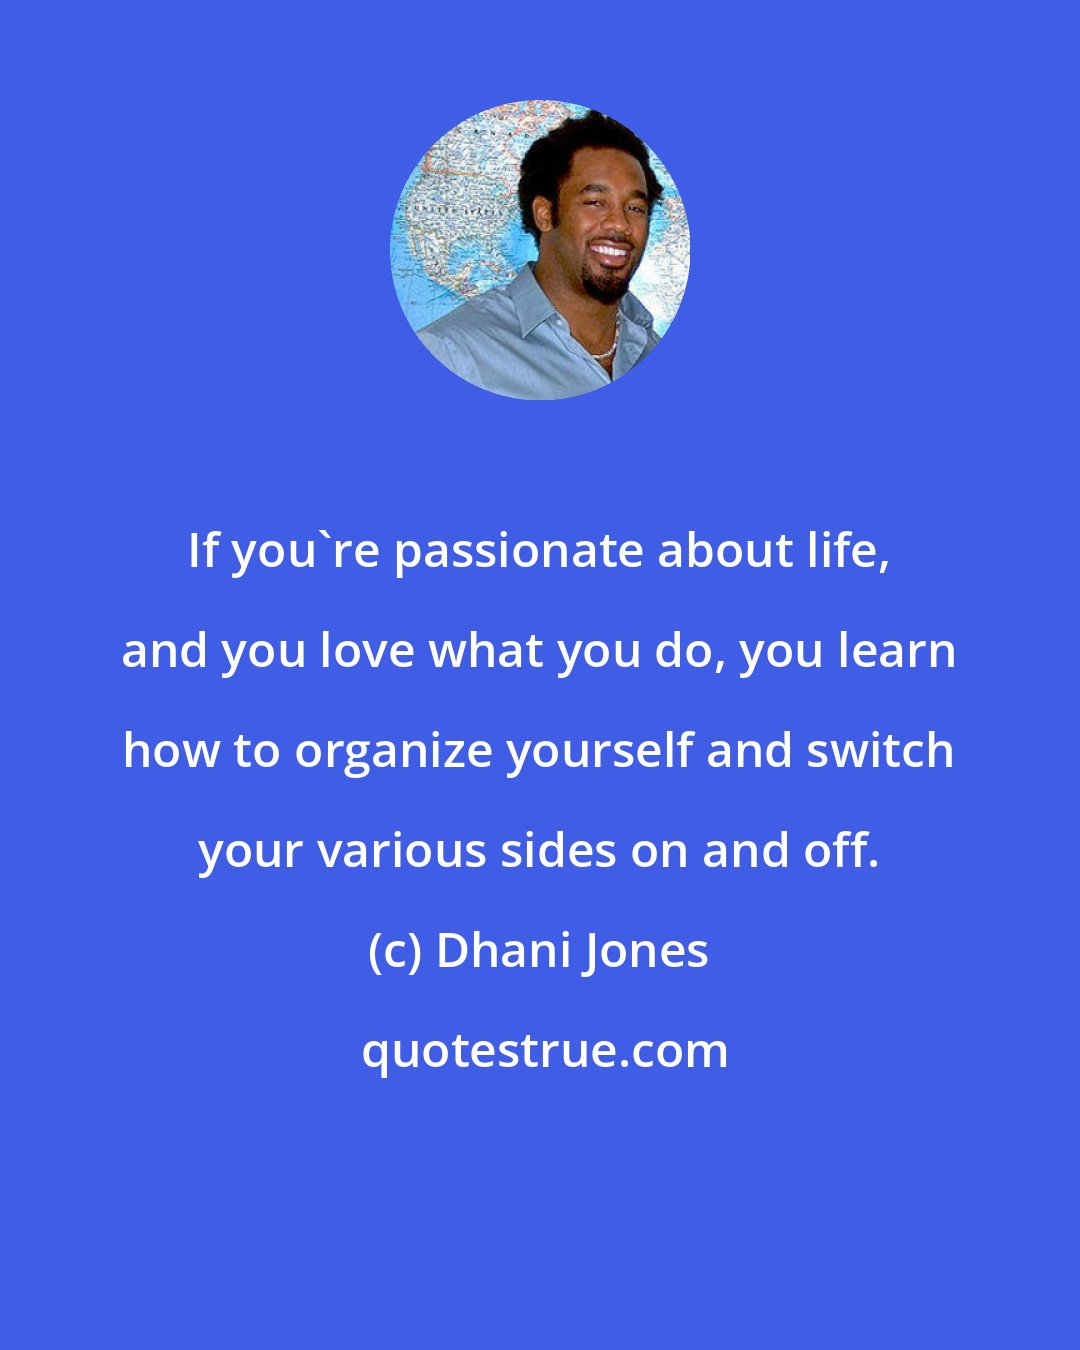 Dhani Jones: If you're passionate about life, and you love what you do, you learn how to organize yourself and switch your various sides on and off.